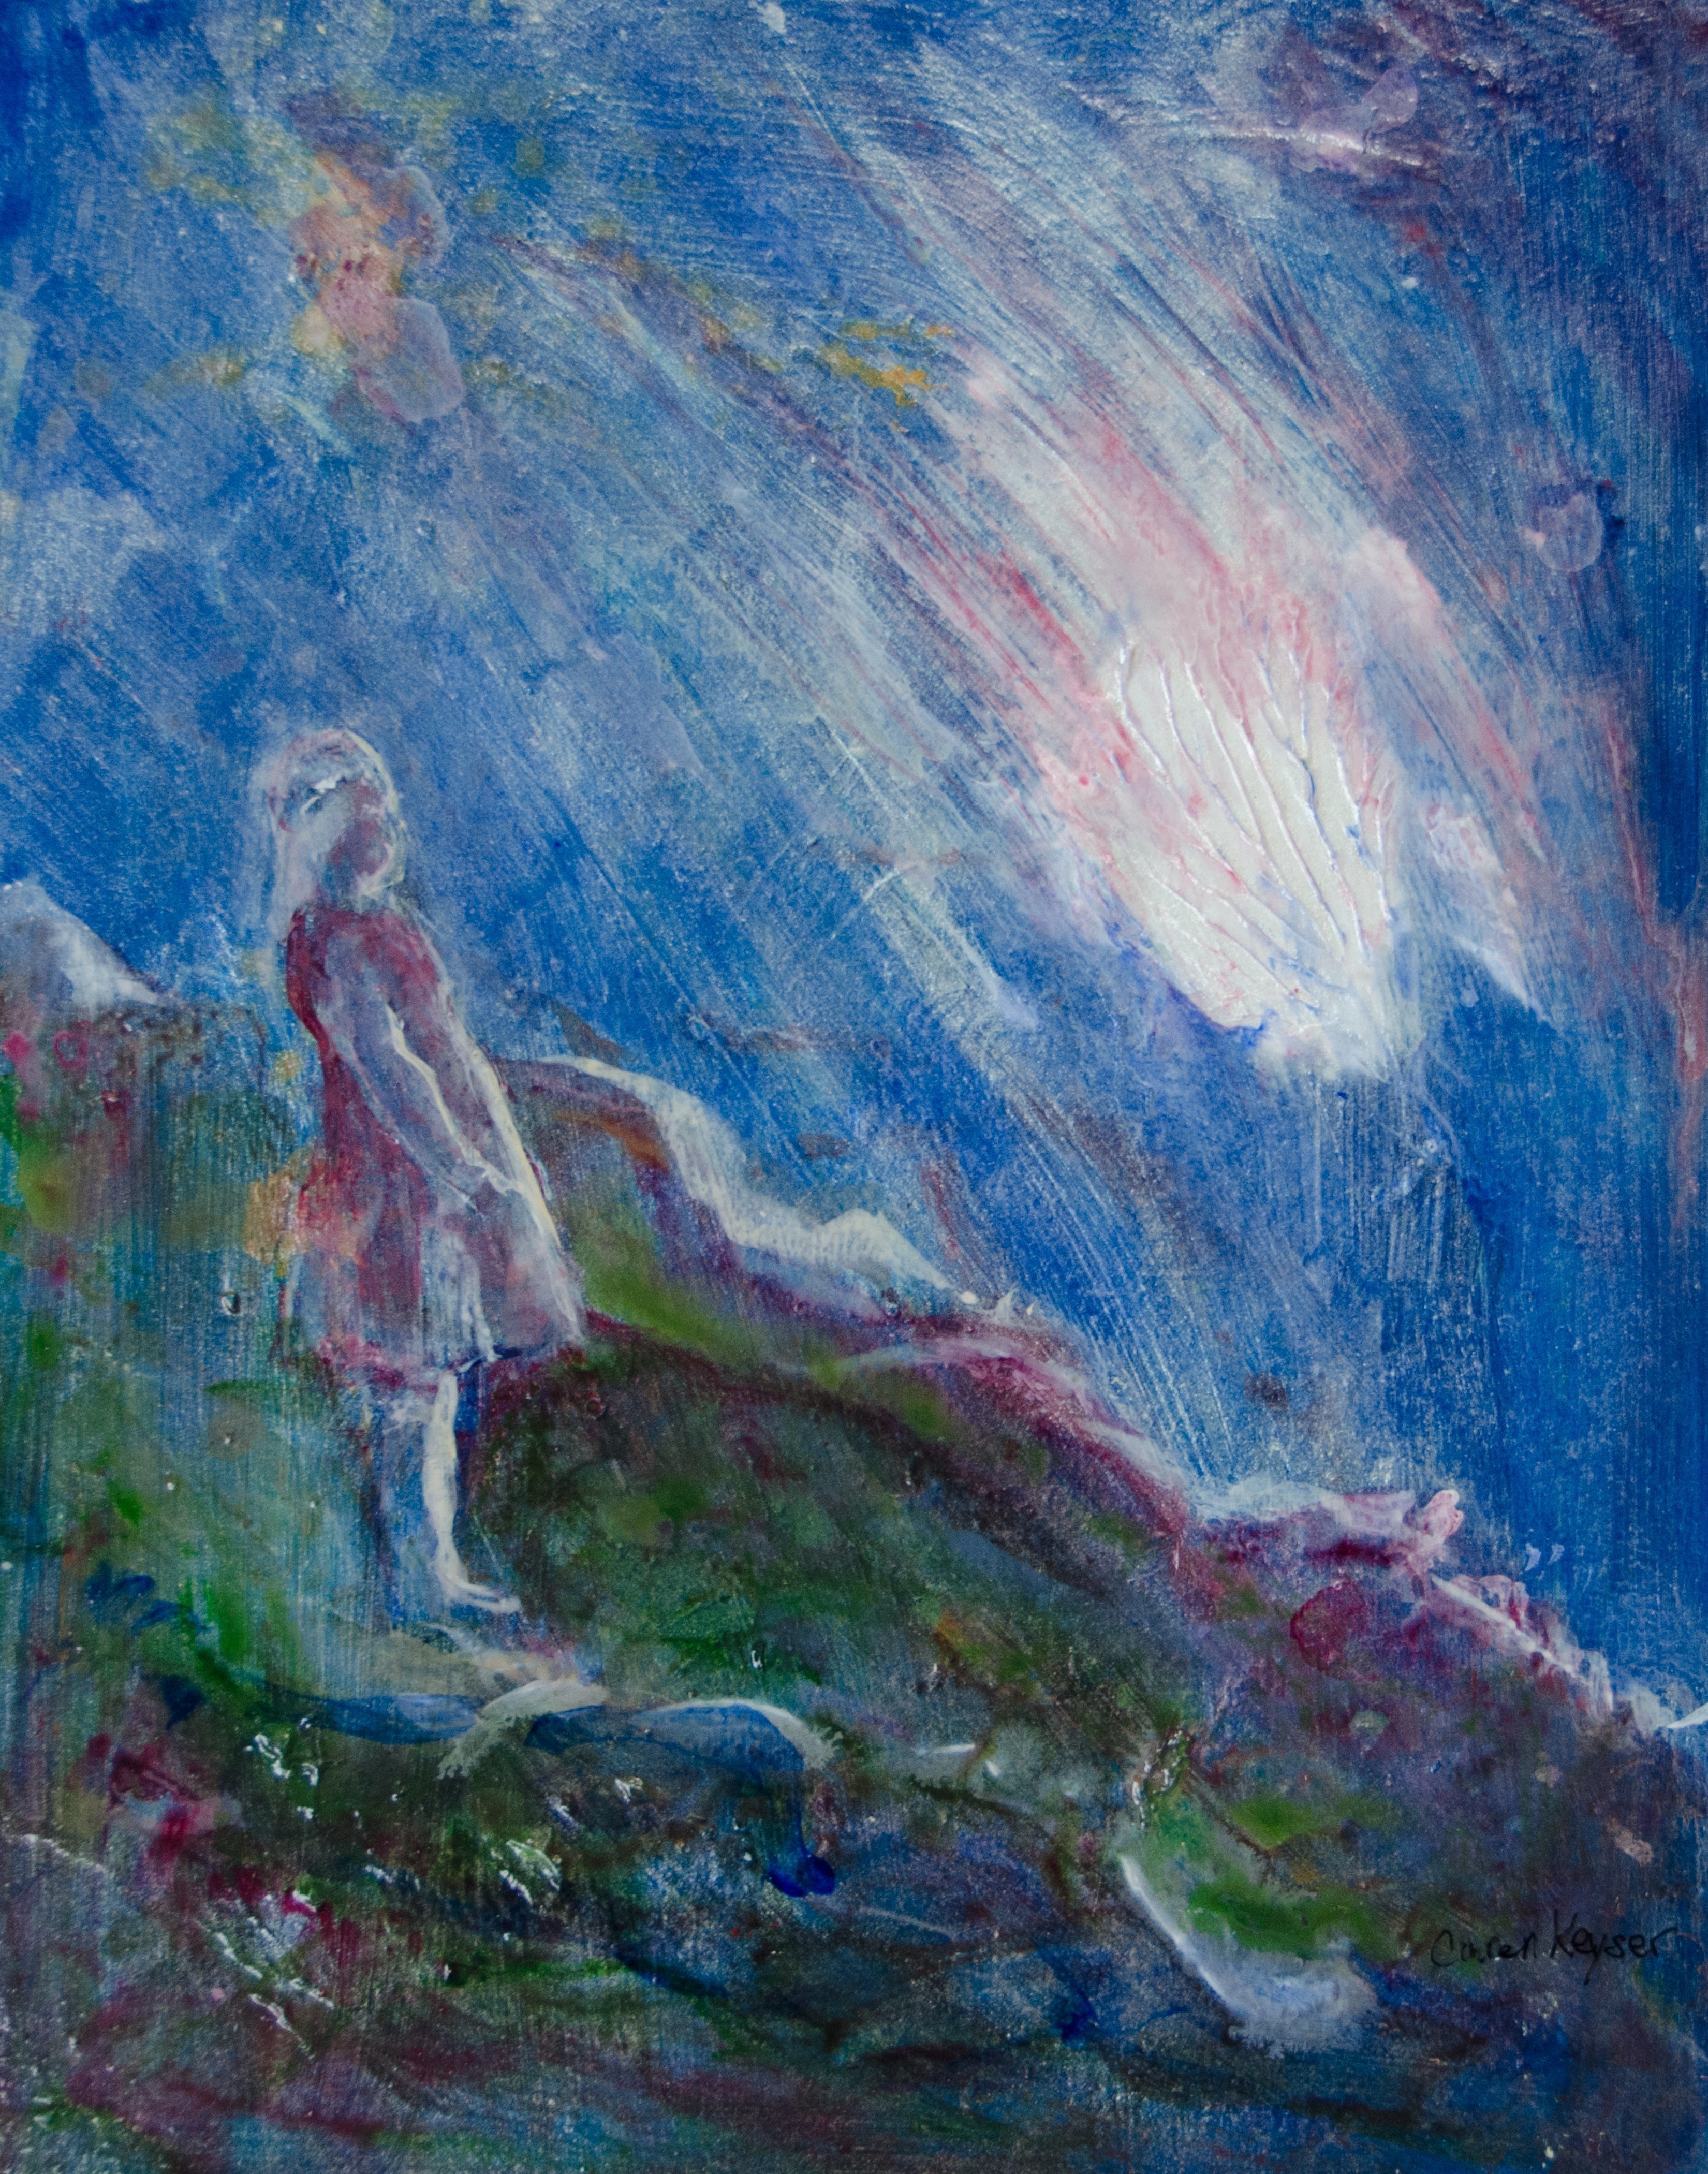 Caren Keyser, 'It Fell From The Sky', 2016, original Painting Acrylic, 11 x 14  cm. Artwork description: 2703  There is a bright glow from an object falling through the night sky. The girl watches it from the hillside. The atmosphere in this painting is enhanced by the use of an iridescent glaze over the entire painting. ...